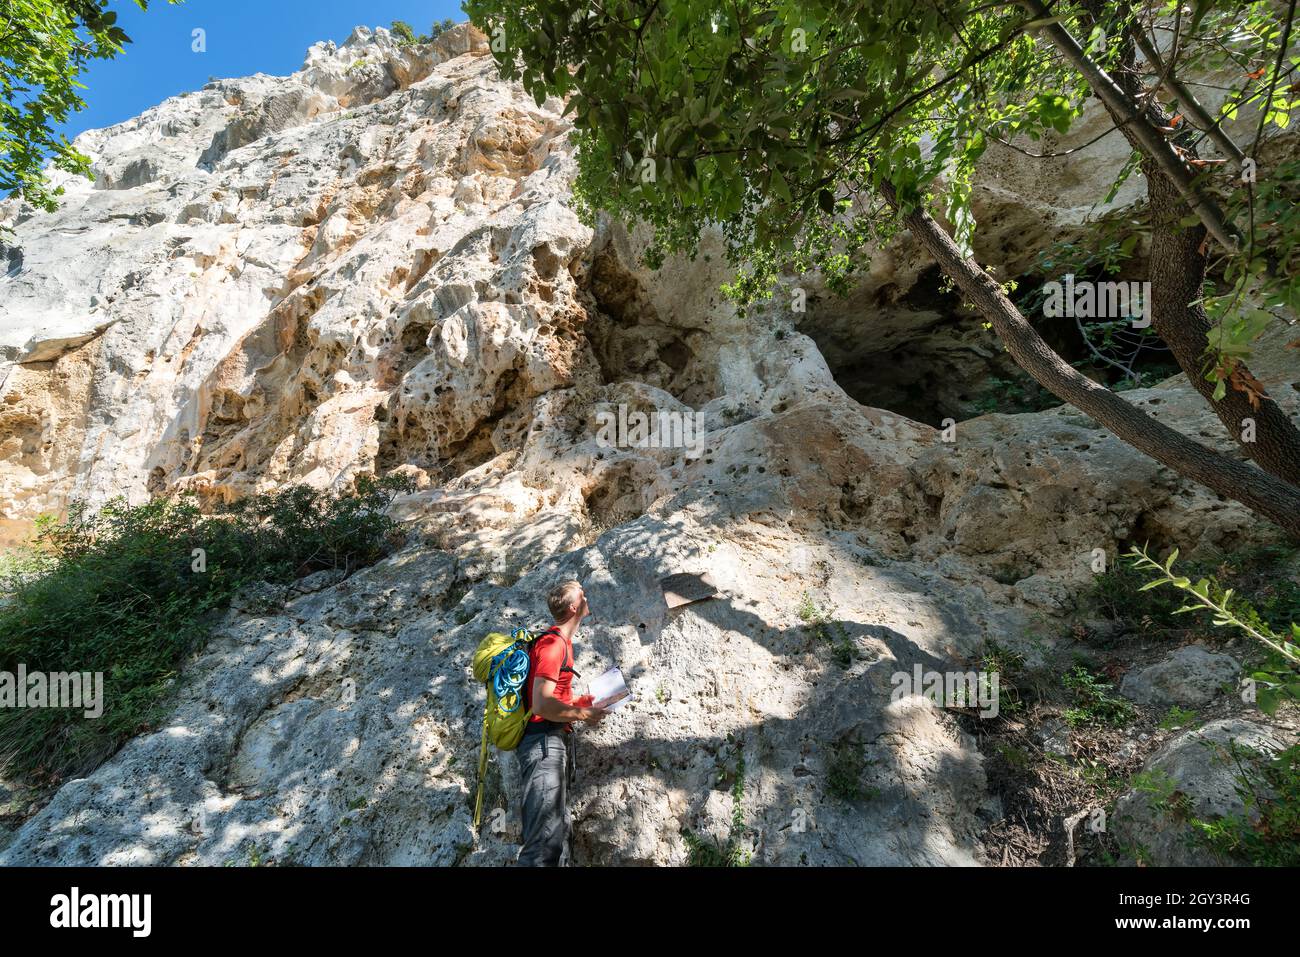 Looking for the rock climbing route at Finale Ligure, Italy Stock Photo